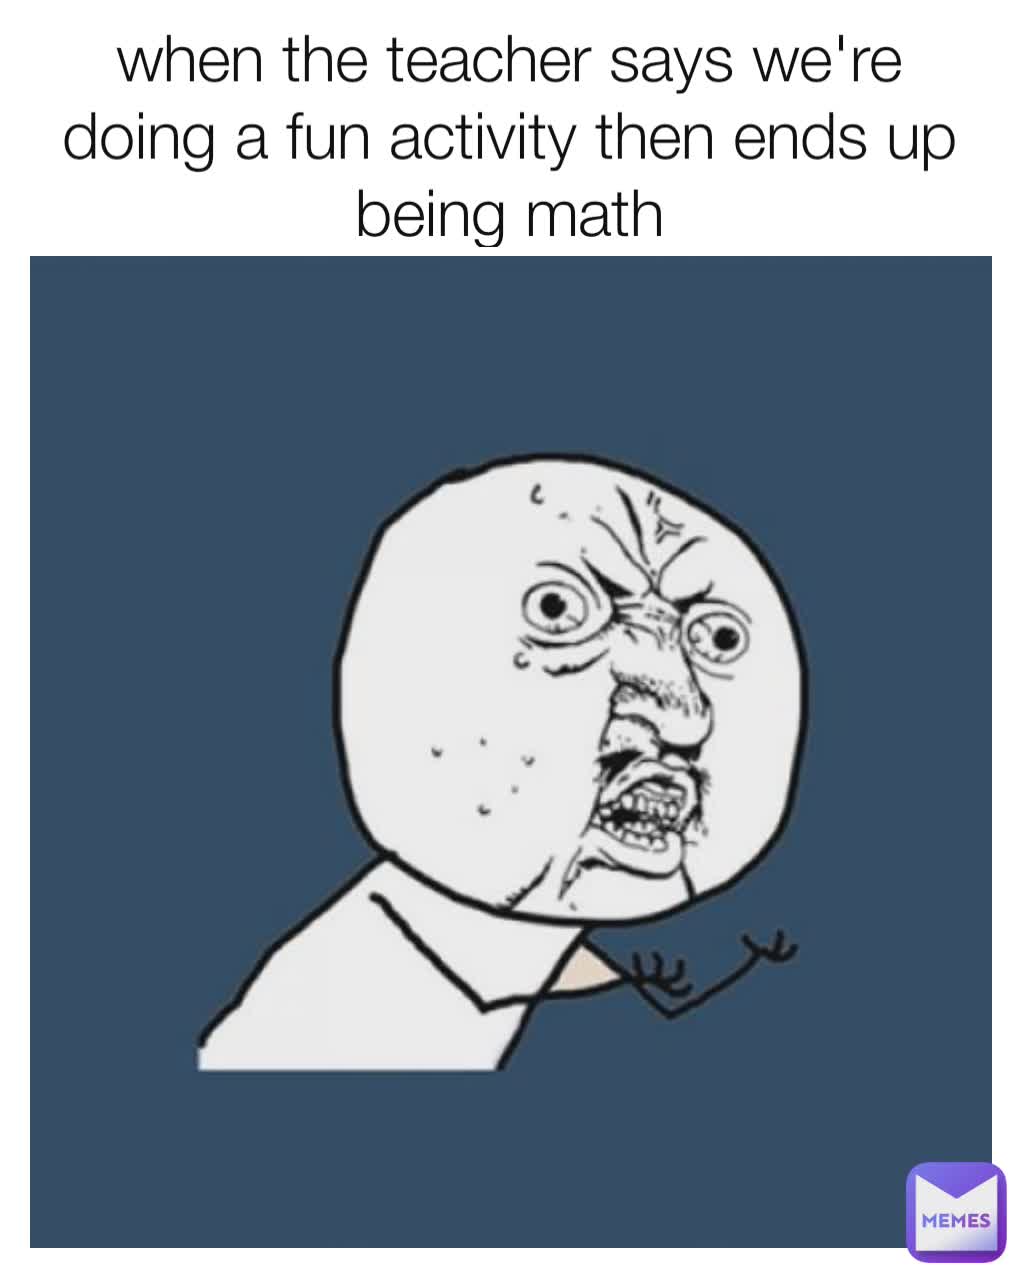 when the teacher says we're doing a fun activity then ends up being math Lilys Memes